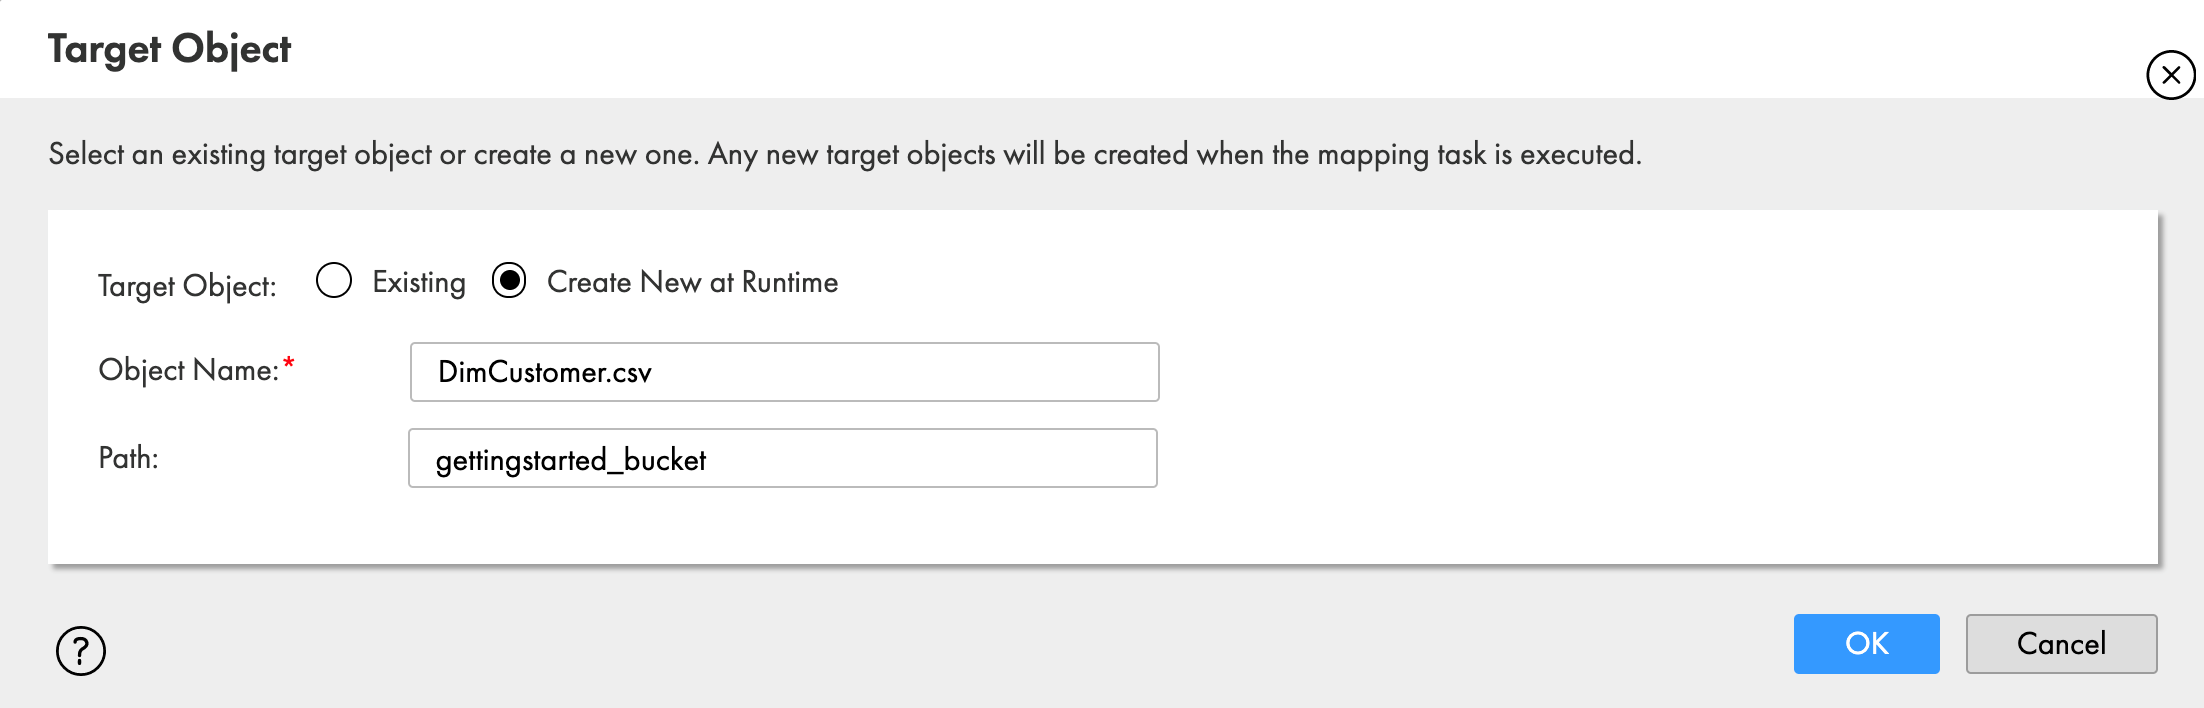 In the Target Object dialog box, the target object is set to "Create New at Runtime." The object name is the name of the target file to be created, and the path is the Google Cloud Storage bucket where the target file will be stored. 
						